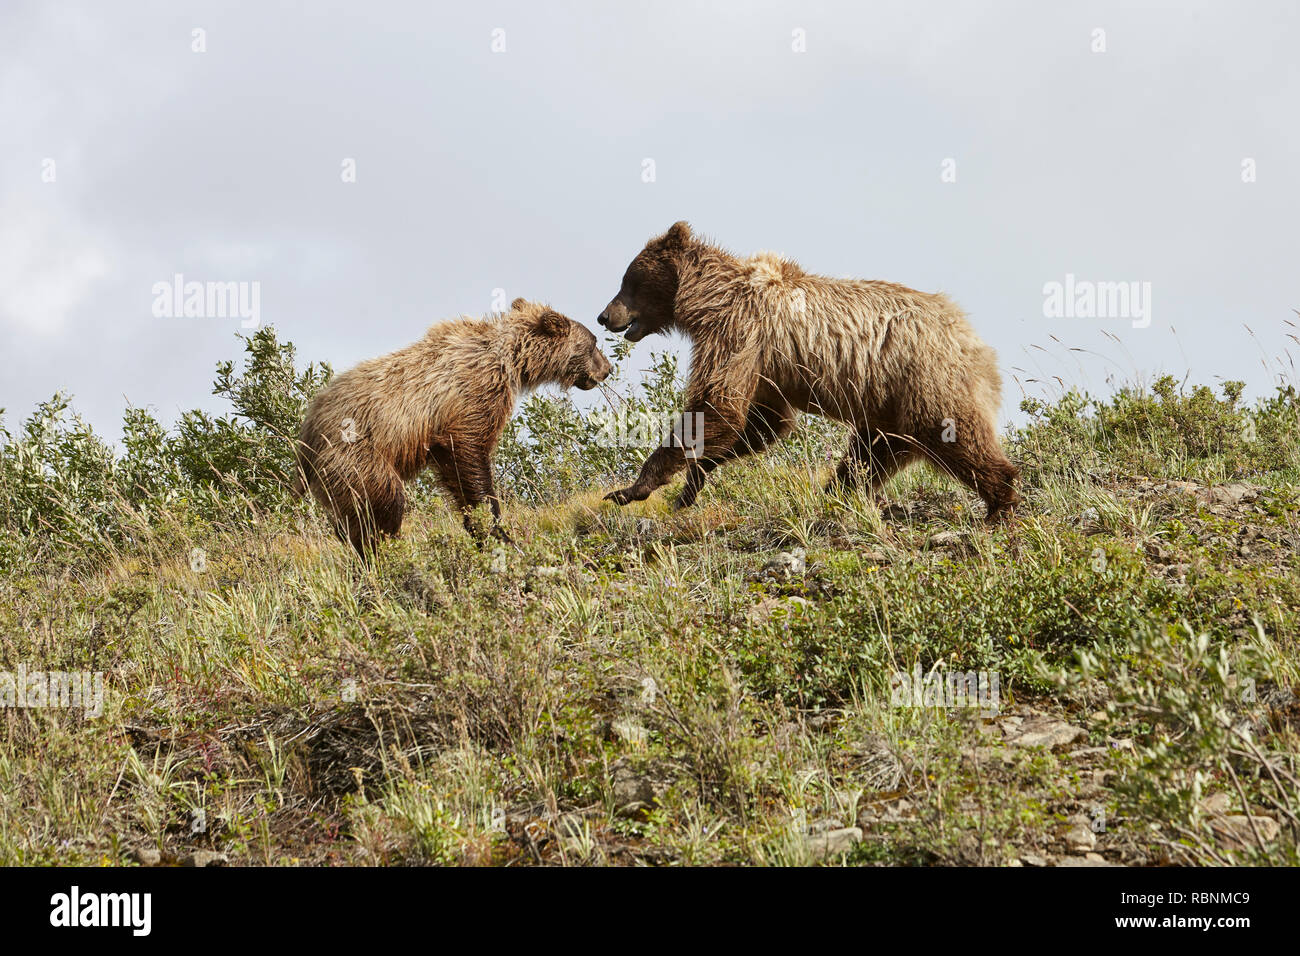 Bear Playing With Cub On Hillside In Alaska Stock Photo